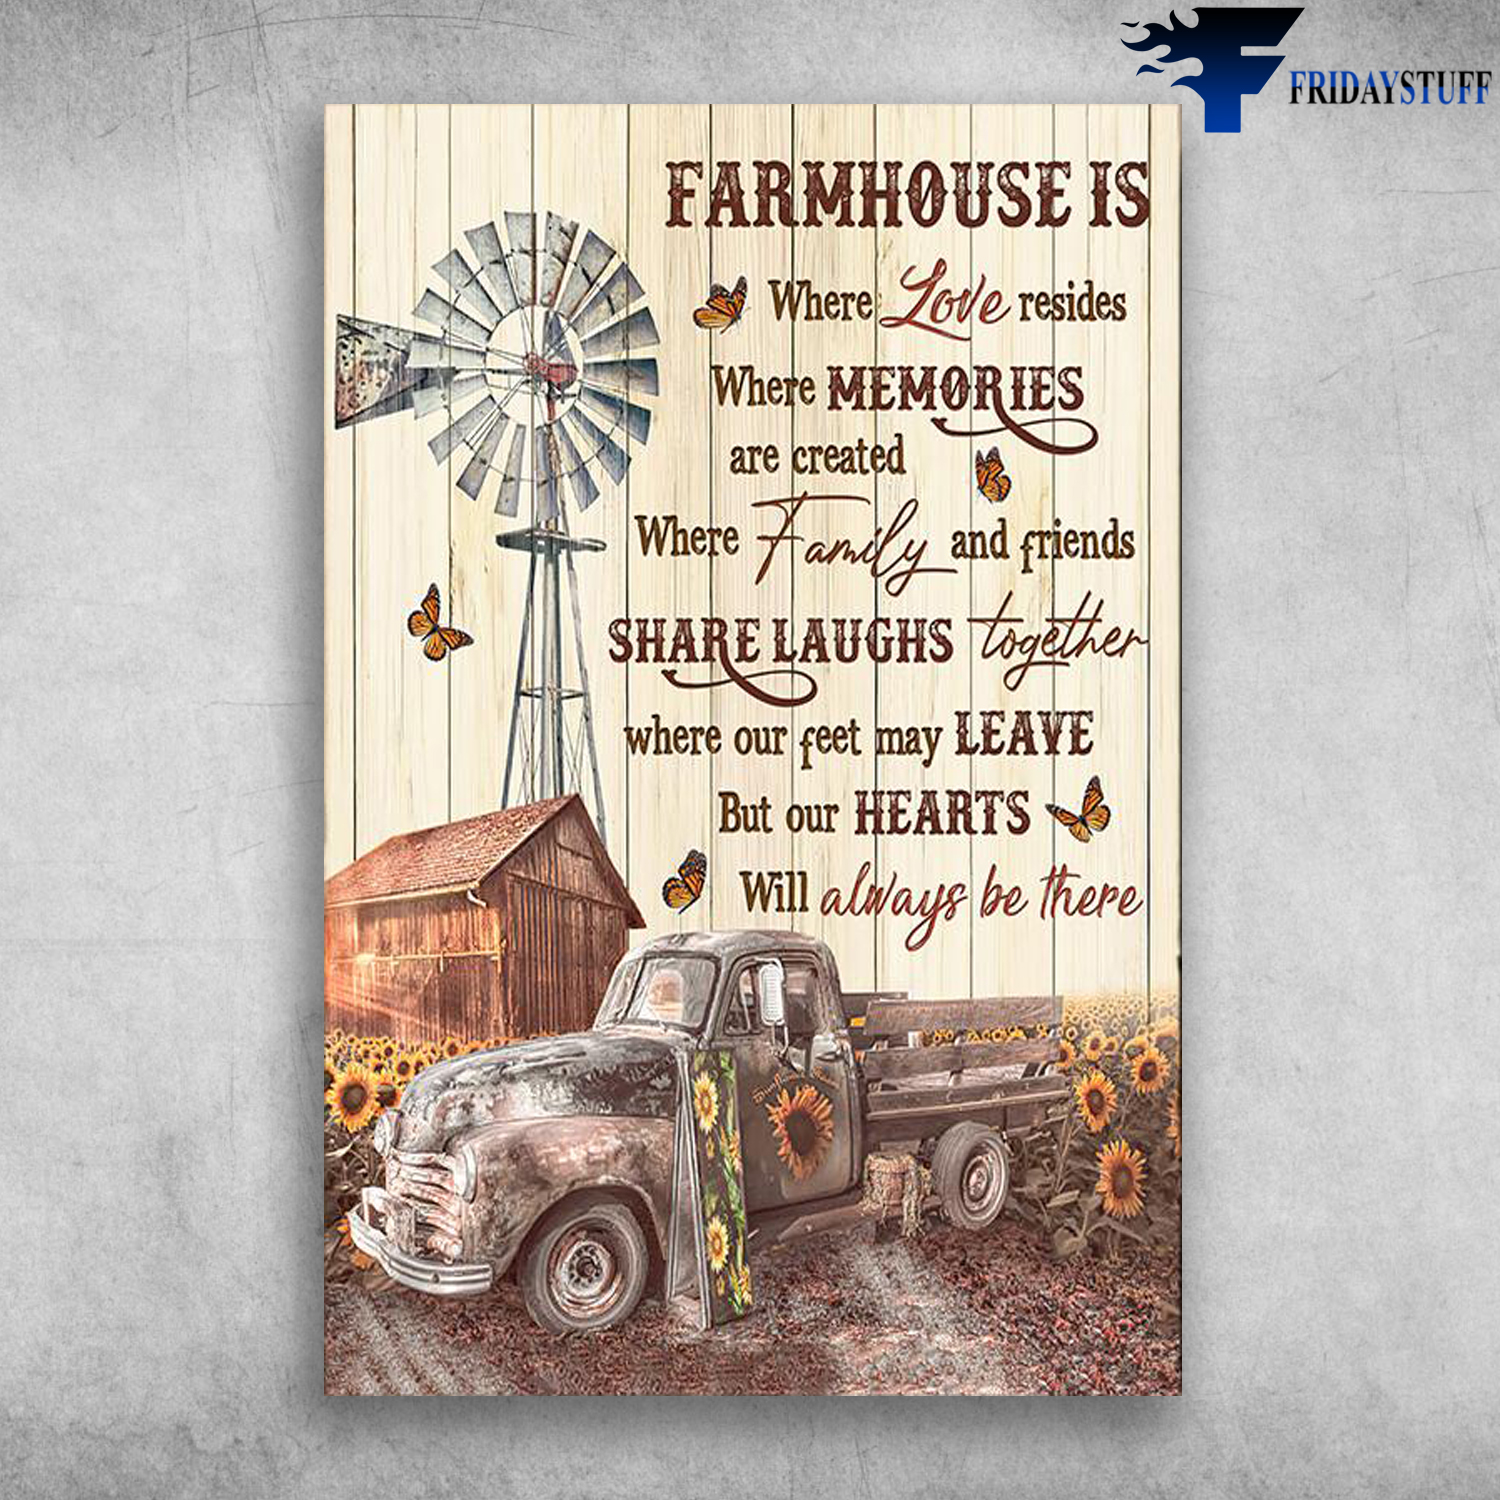 Truck, Windmill And Sunflower Garden - Farmhouse Is Where Love Resides, Where Memories Are Created, Where Family And Friends Share Laughs Together Where Cur Feet May Leave, But Our Feet May Leave But Our Hearts Will Always Be There